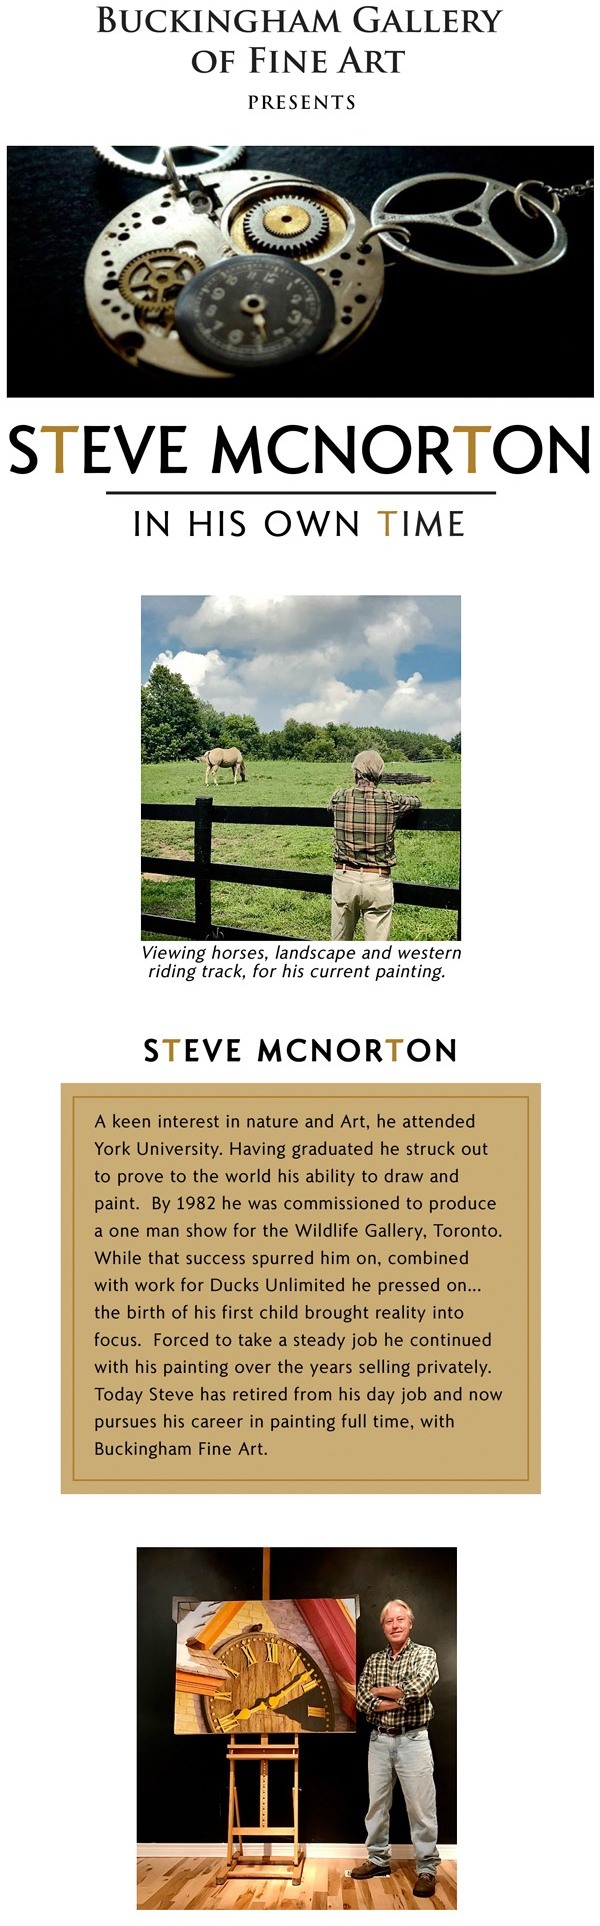 Steve McNorton - In His Own Time